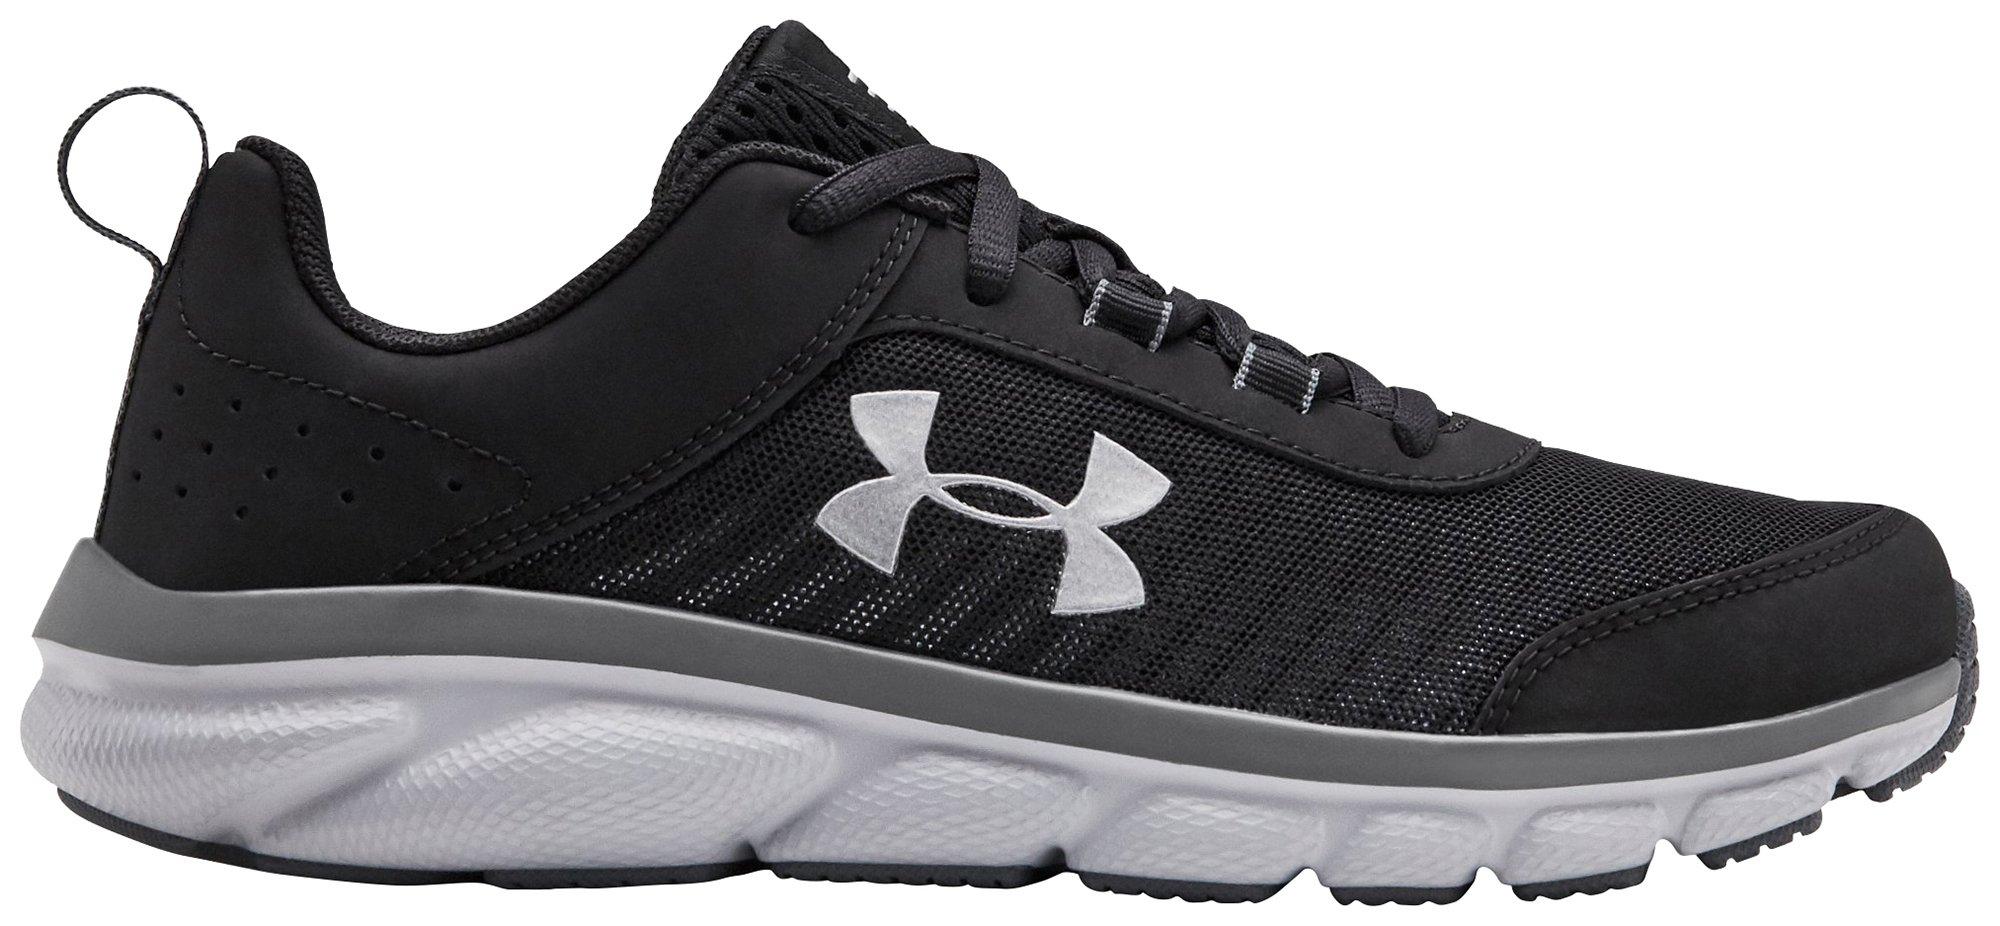 gray and black under armour shoes